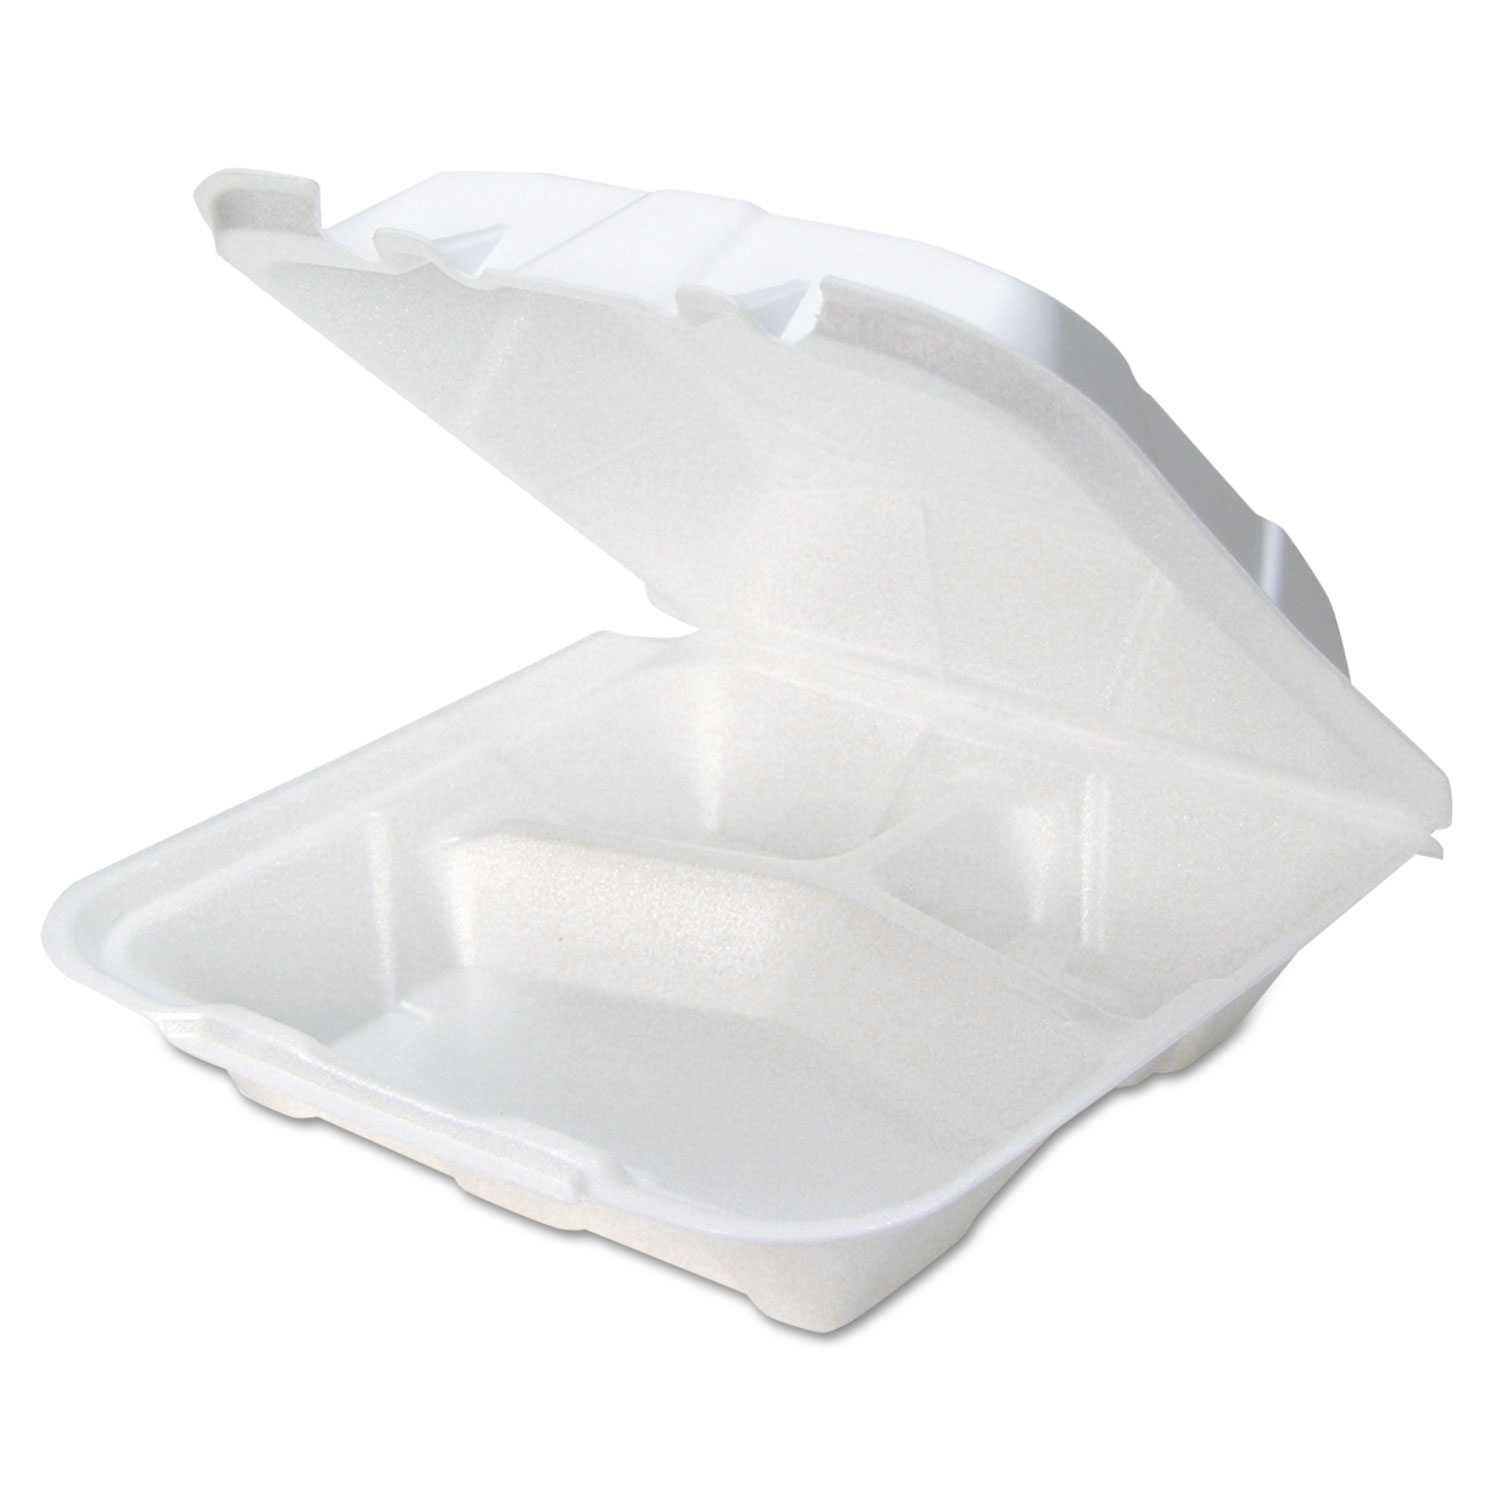  Pactiv YTD199030000 Foam Hinged Lid Containers, White, 9 x 9 x 3.25, 3-Compartment, 150/Carton (PCTYTD19903) 